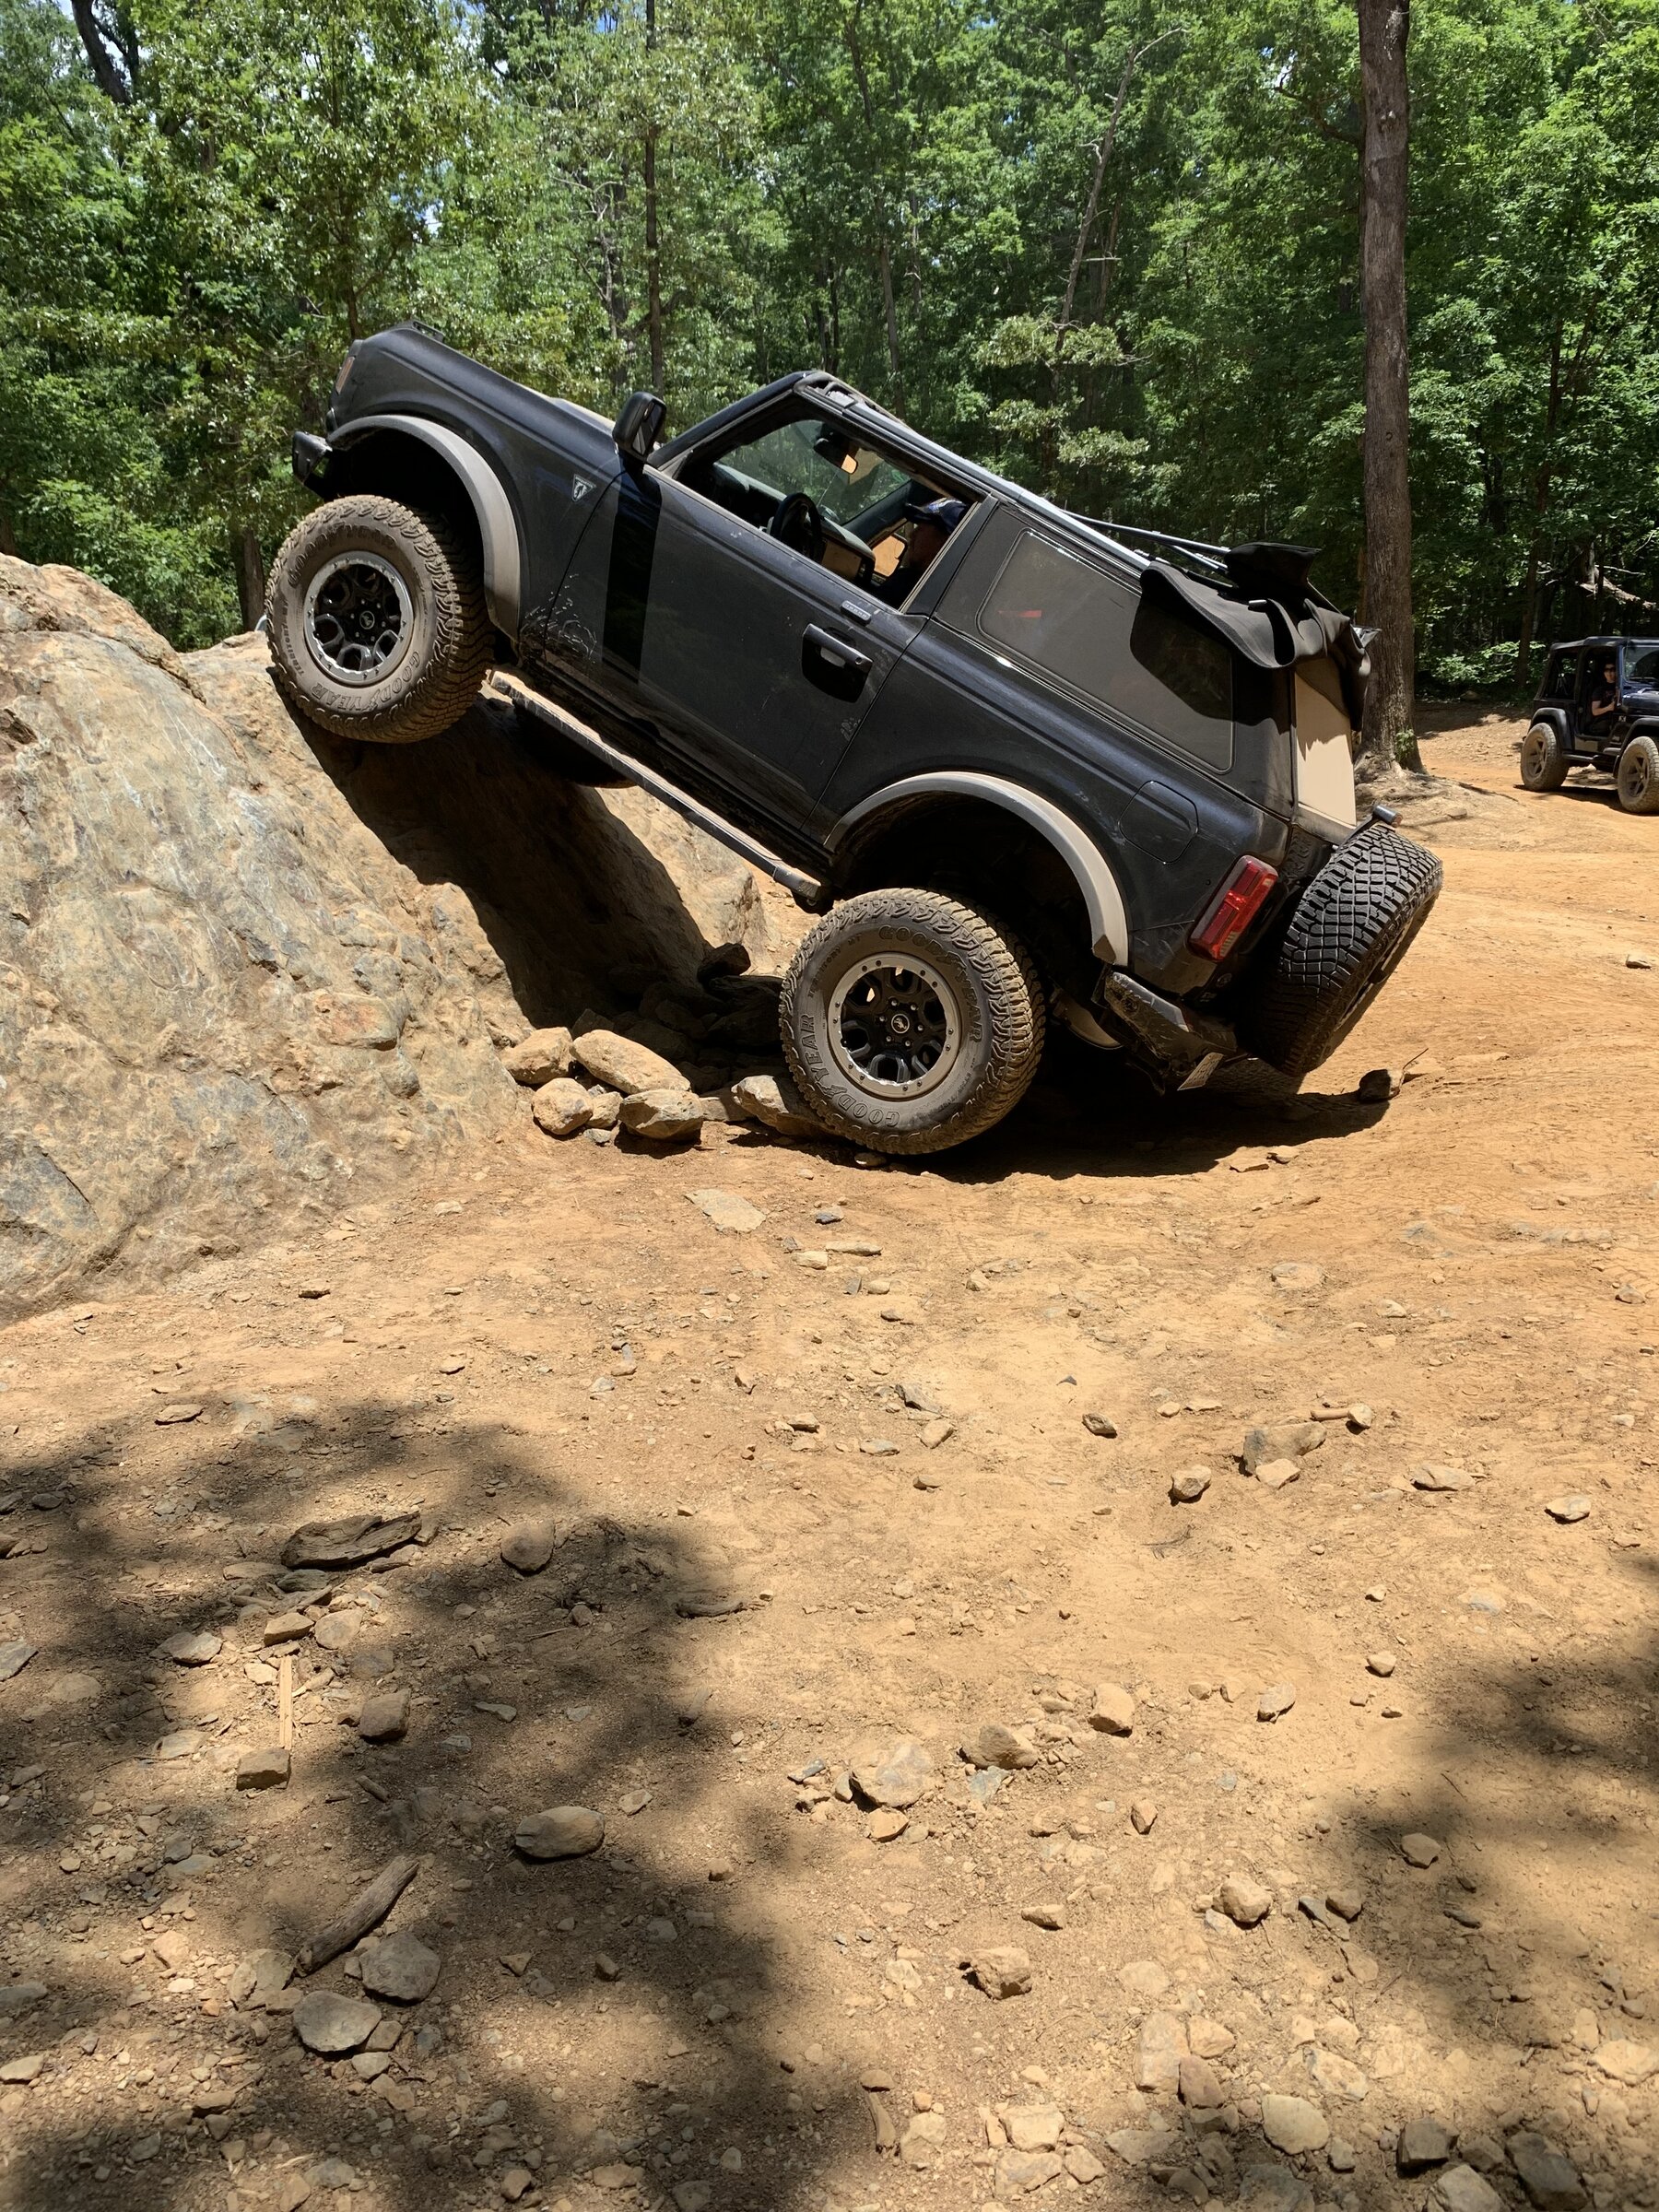 Ford Bronco Biggest Bronco day at Uwharrie National Forest yet 9984402E-9B5D-4C34-AC69-727331F7849E